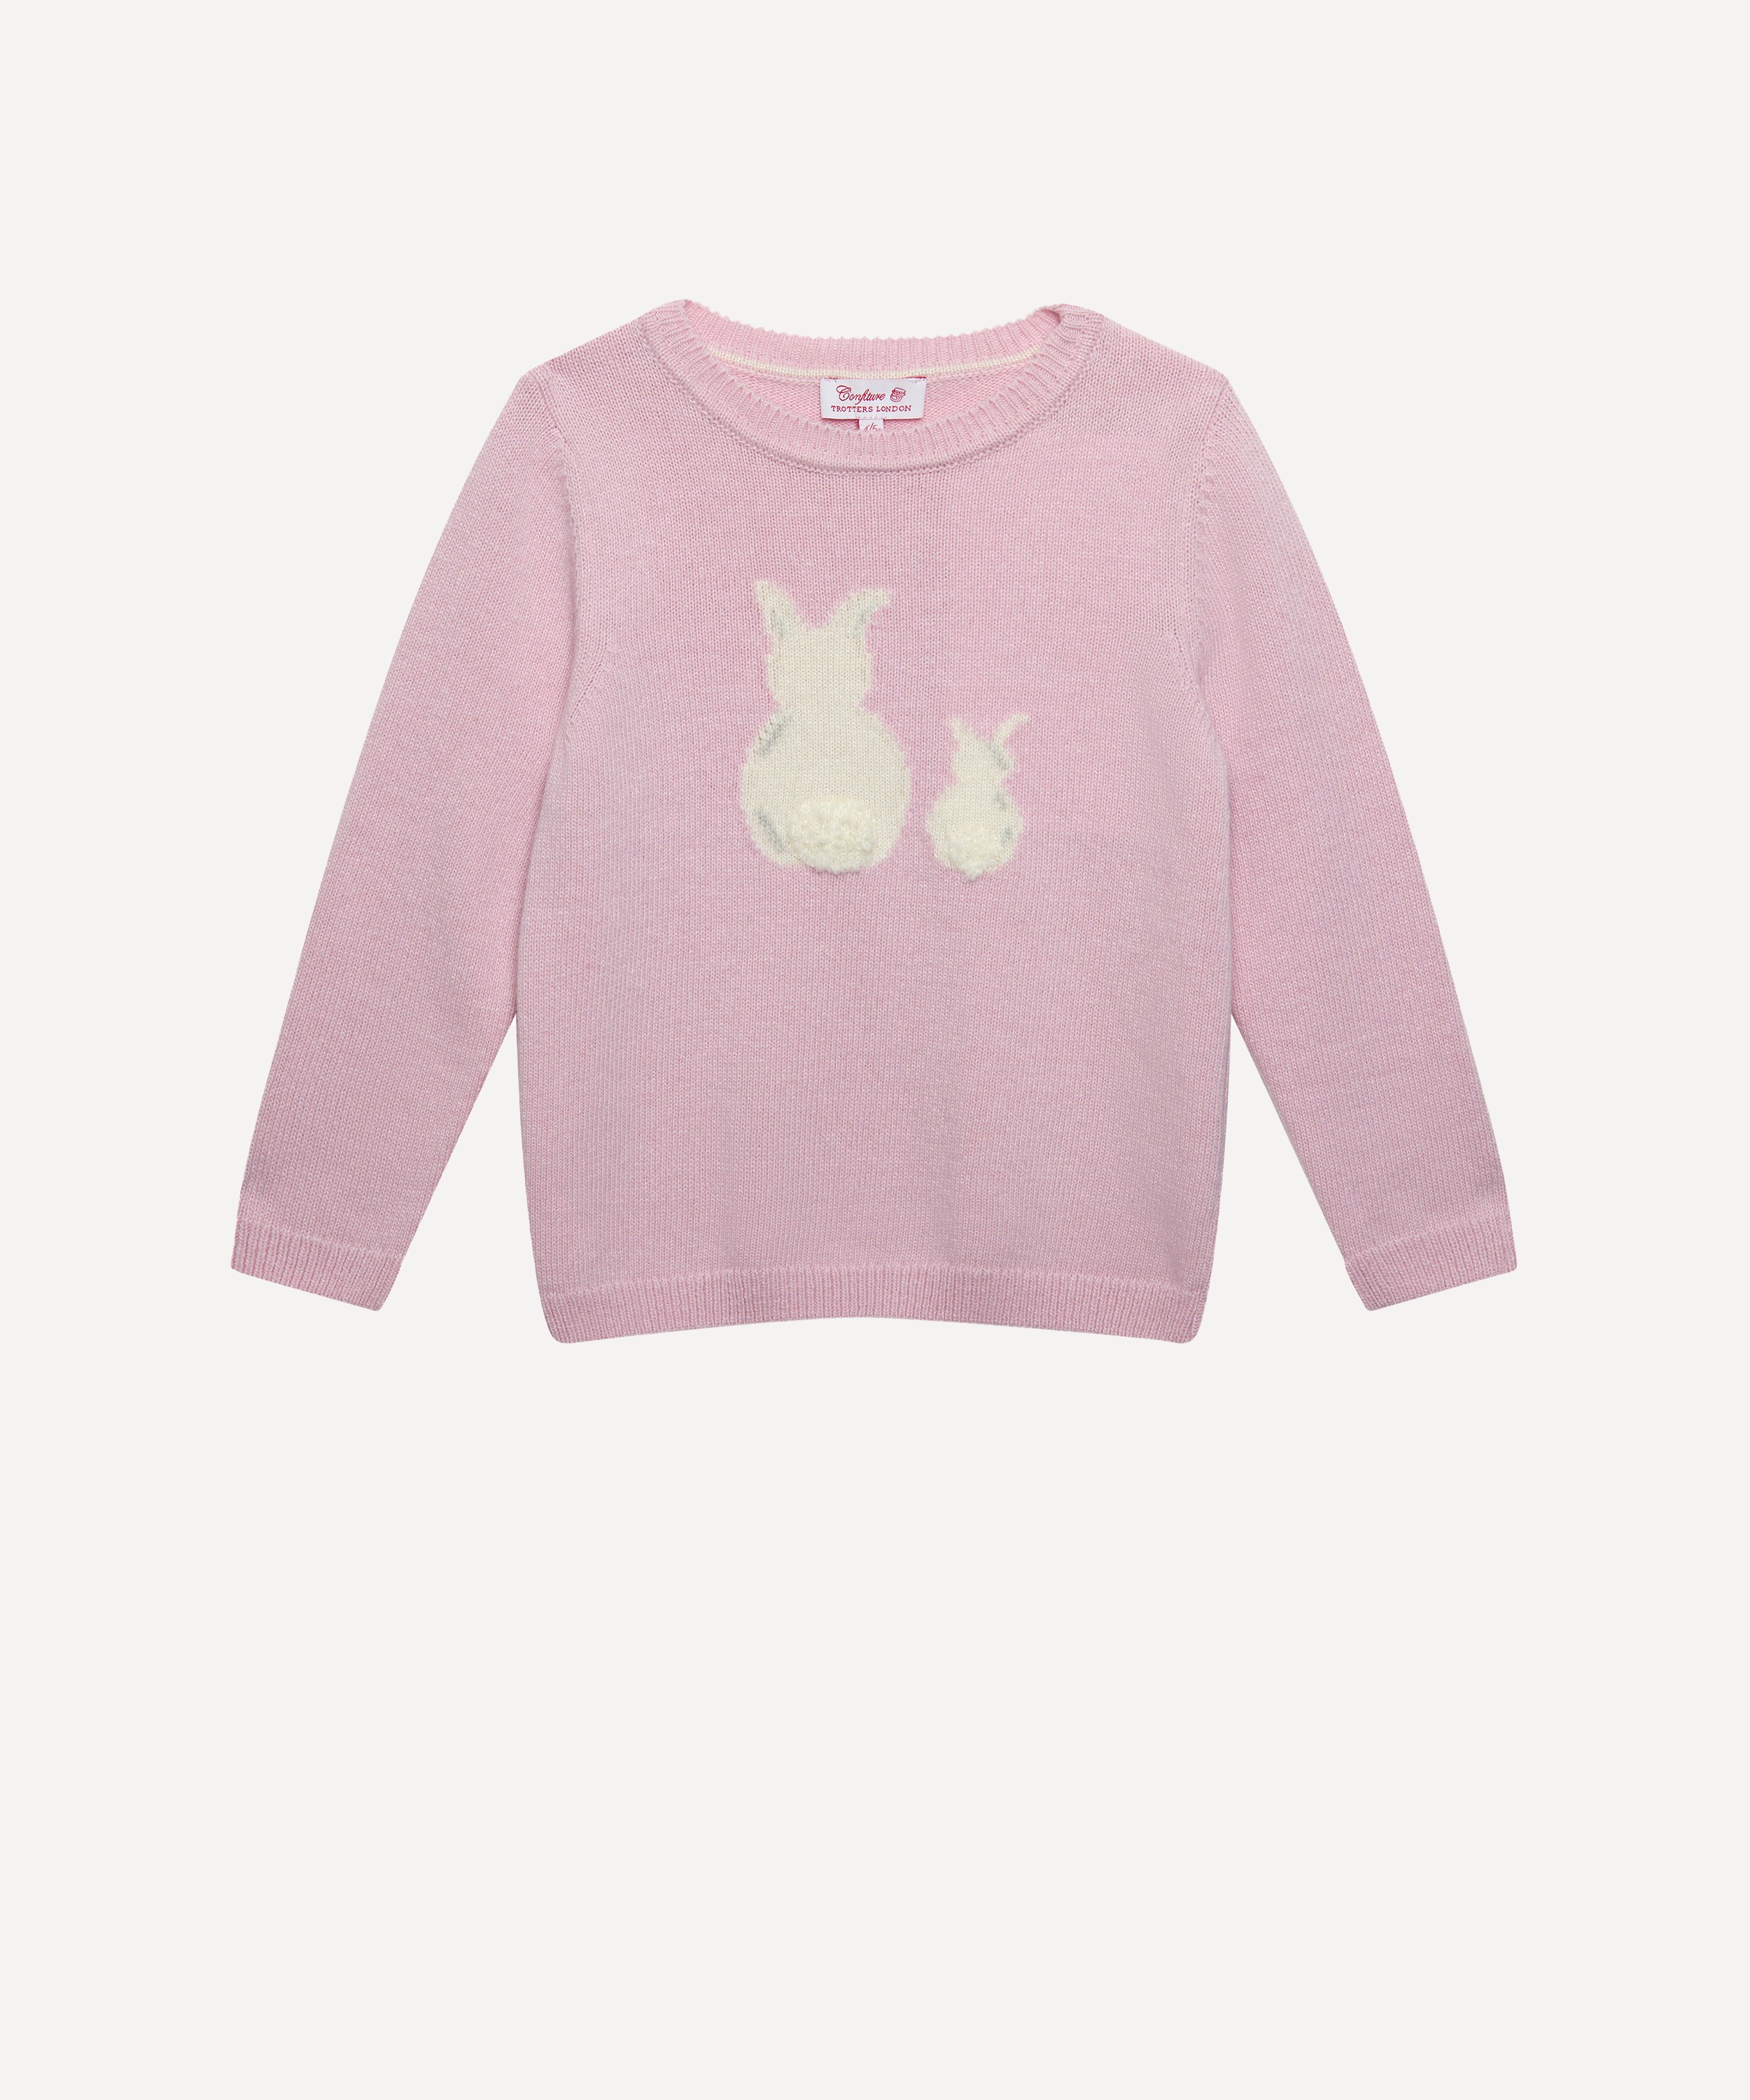 Trotters - Bella Bunny Jumper 8-11 Years